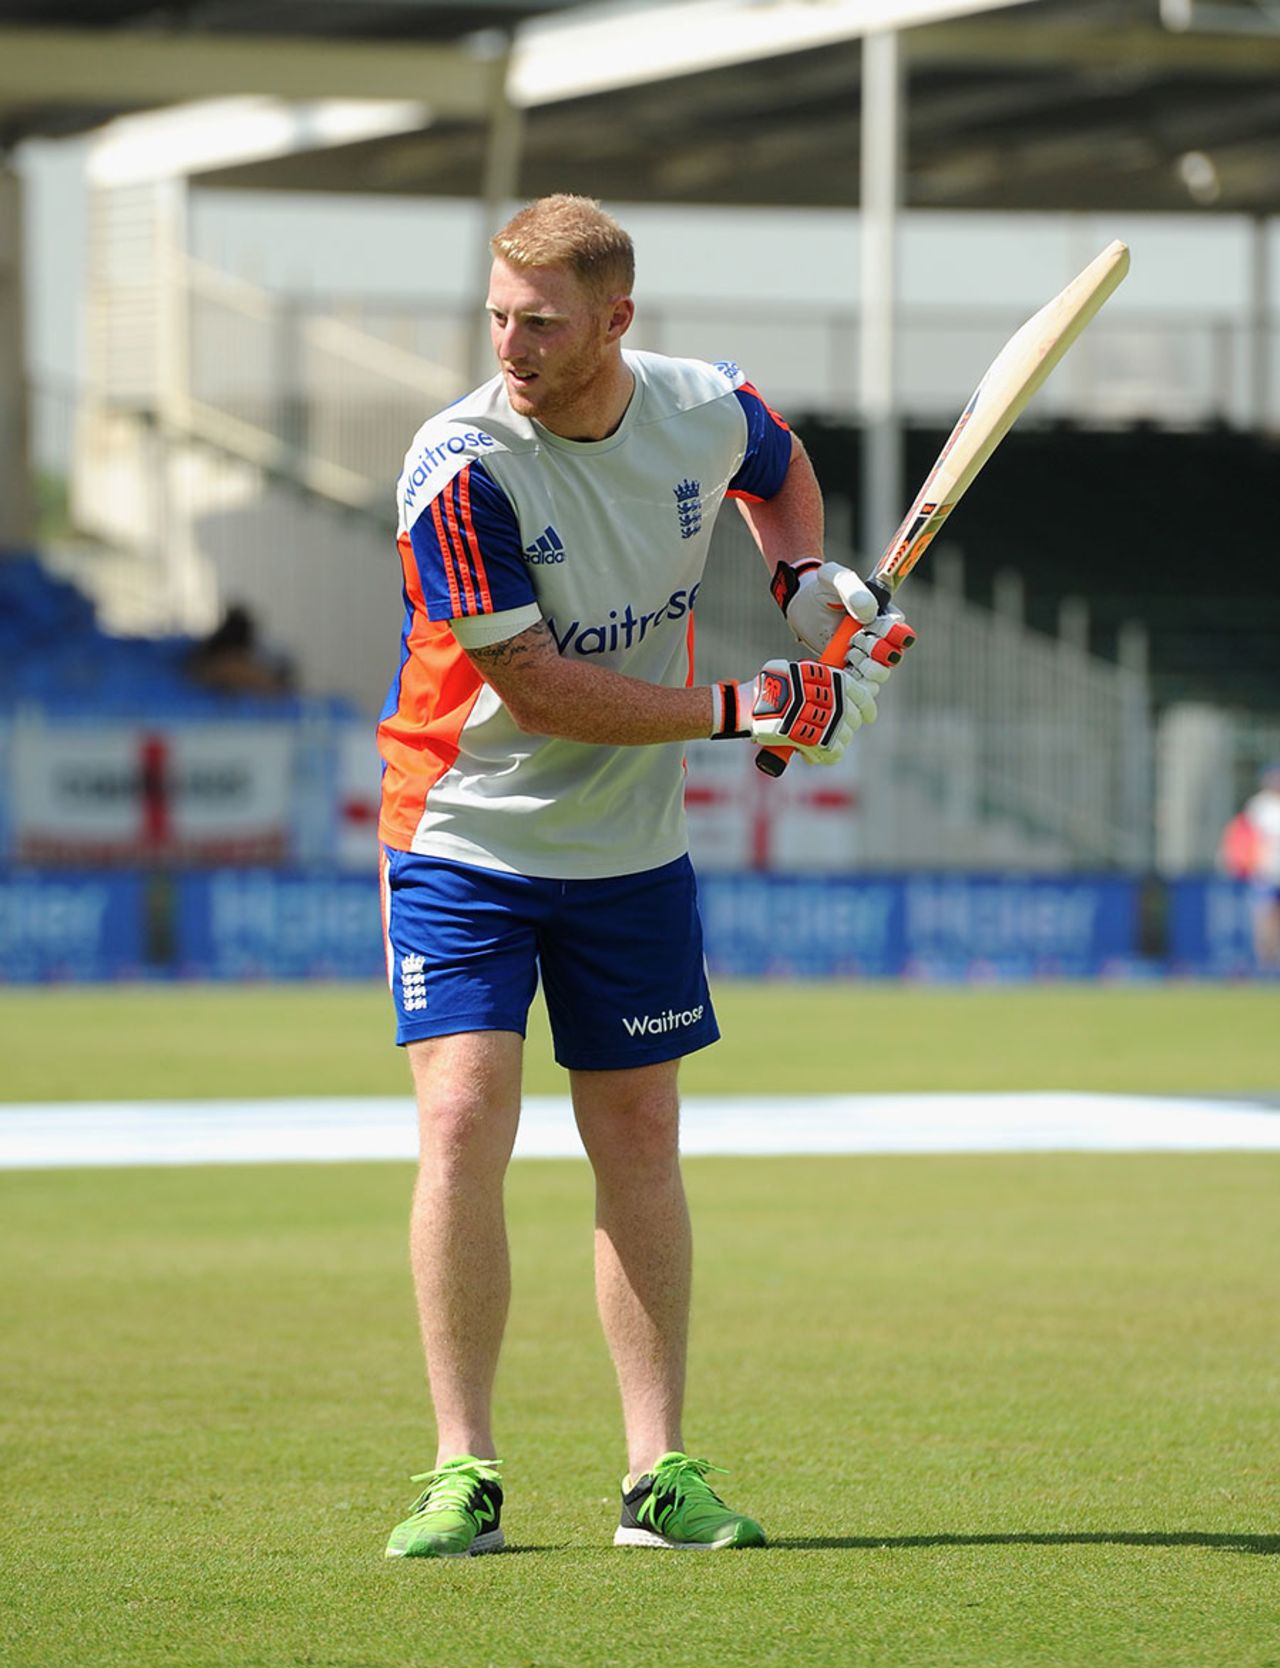 Ben Stokes had a few practice hits on the outfield during lunch, Pakistan v England, 3rd Test, Sharjah, 3rd day, November 3, 2015